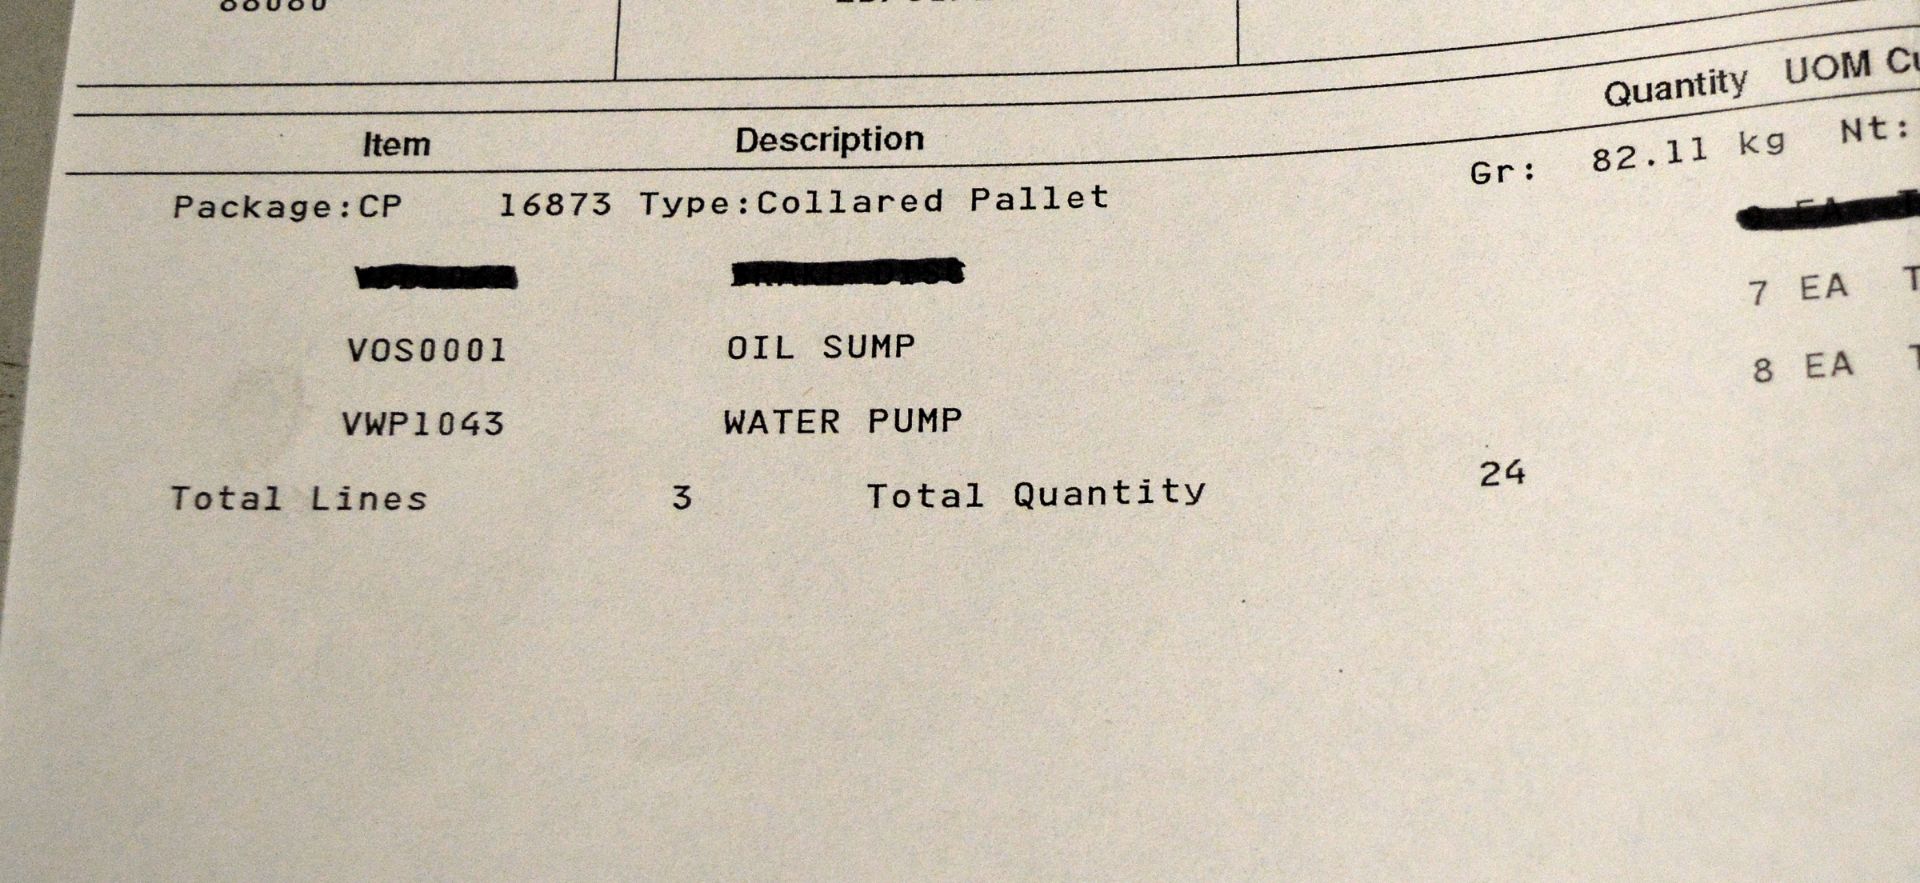 Vehicle parts - oil sumps, water pumps - see picture for itinerary for model numbers and q - Image 5 of 5